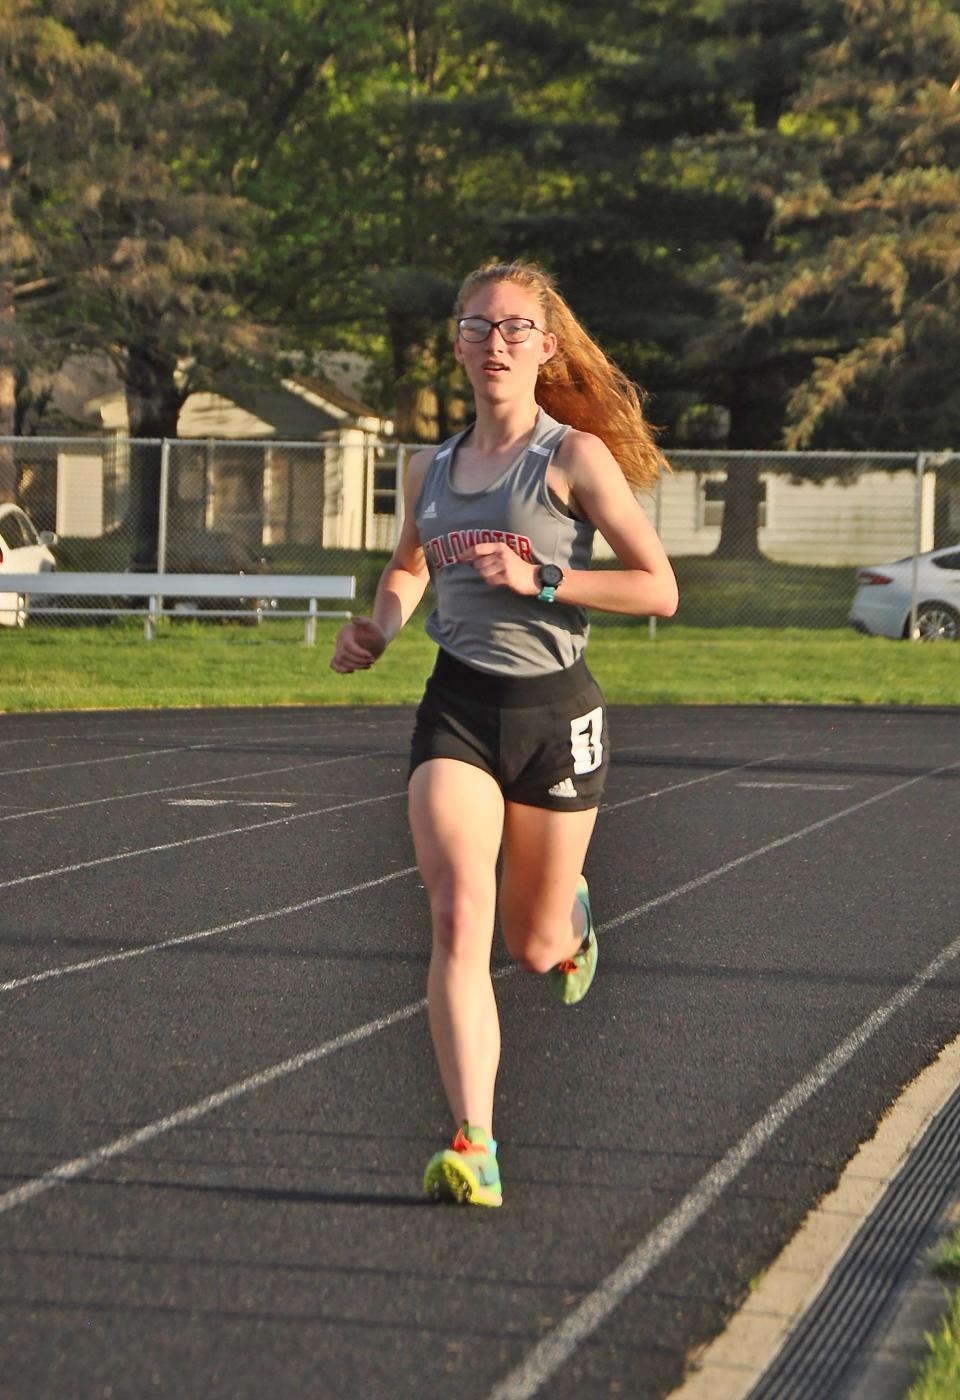 Coldwater's sophomore Lainey Yearling qualified for the MHSAA State Finals with her second place finish in the 3200 meter run at regionals on Friday